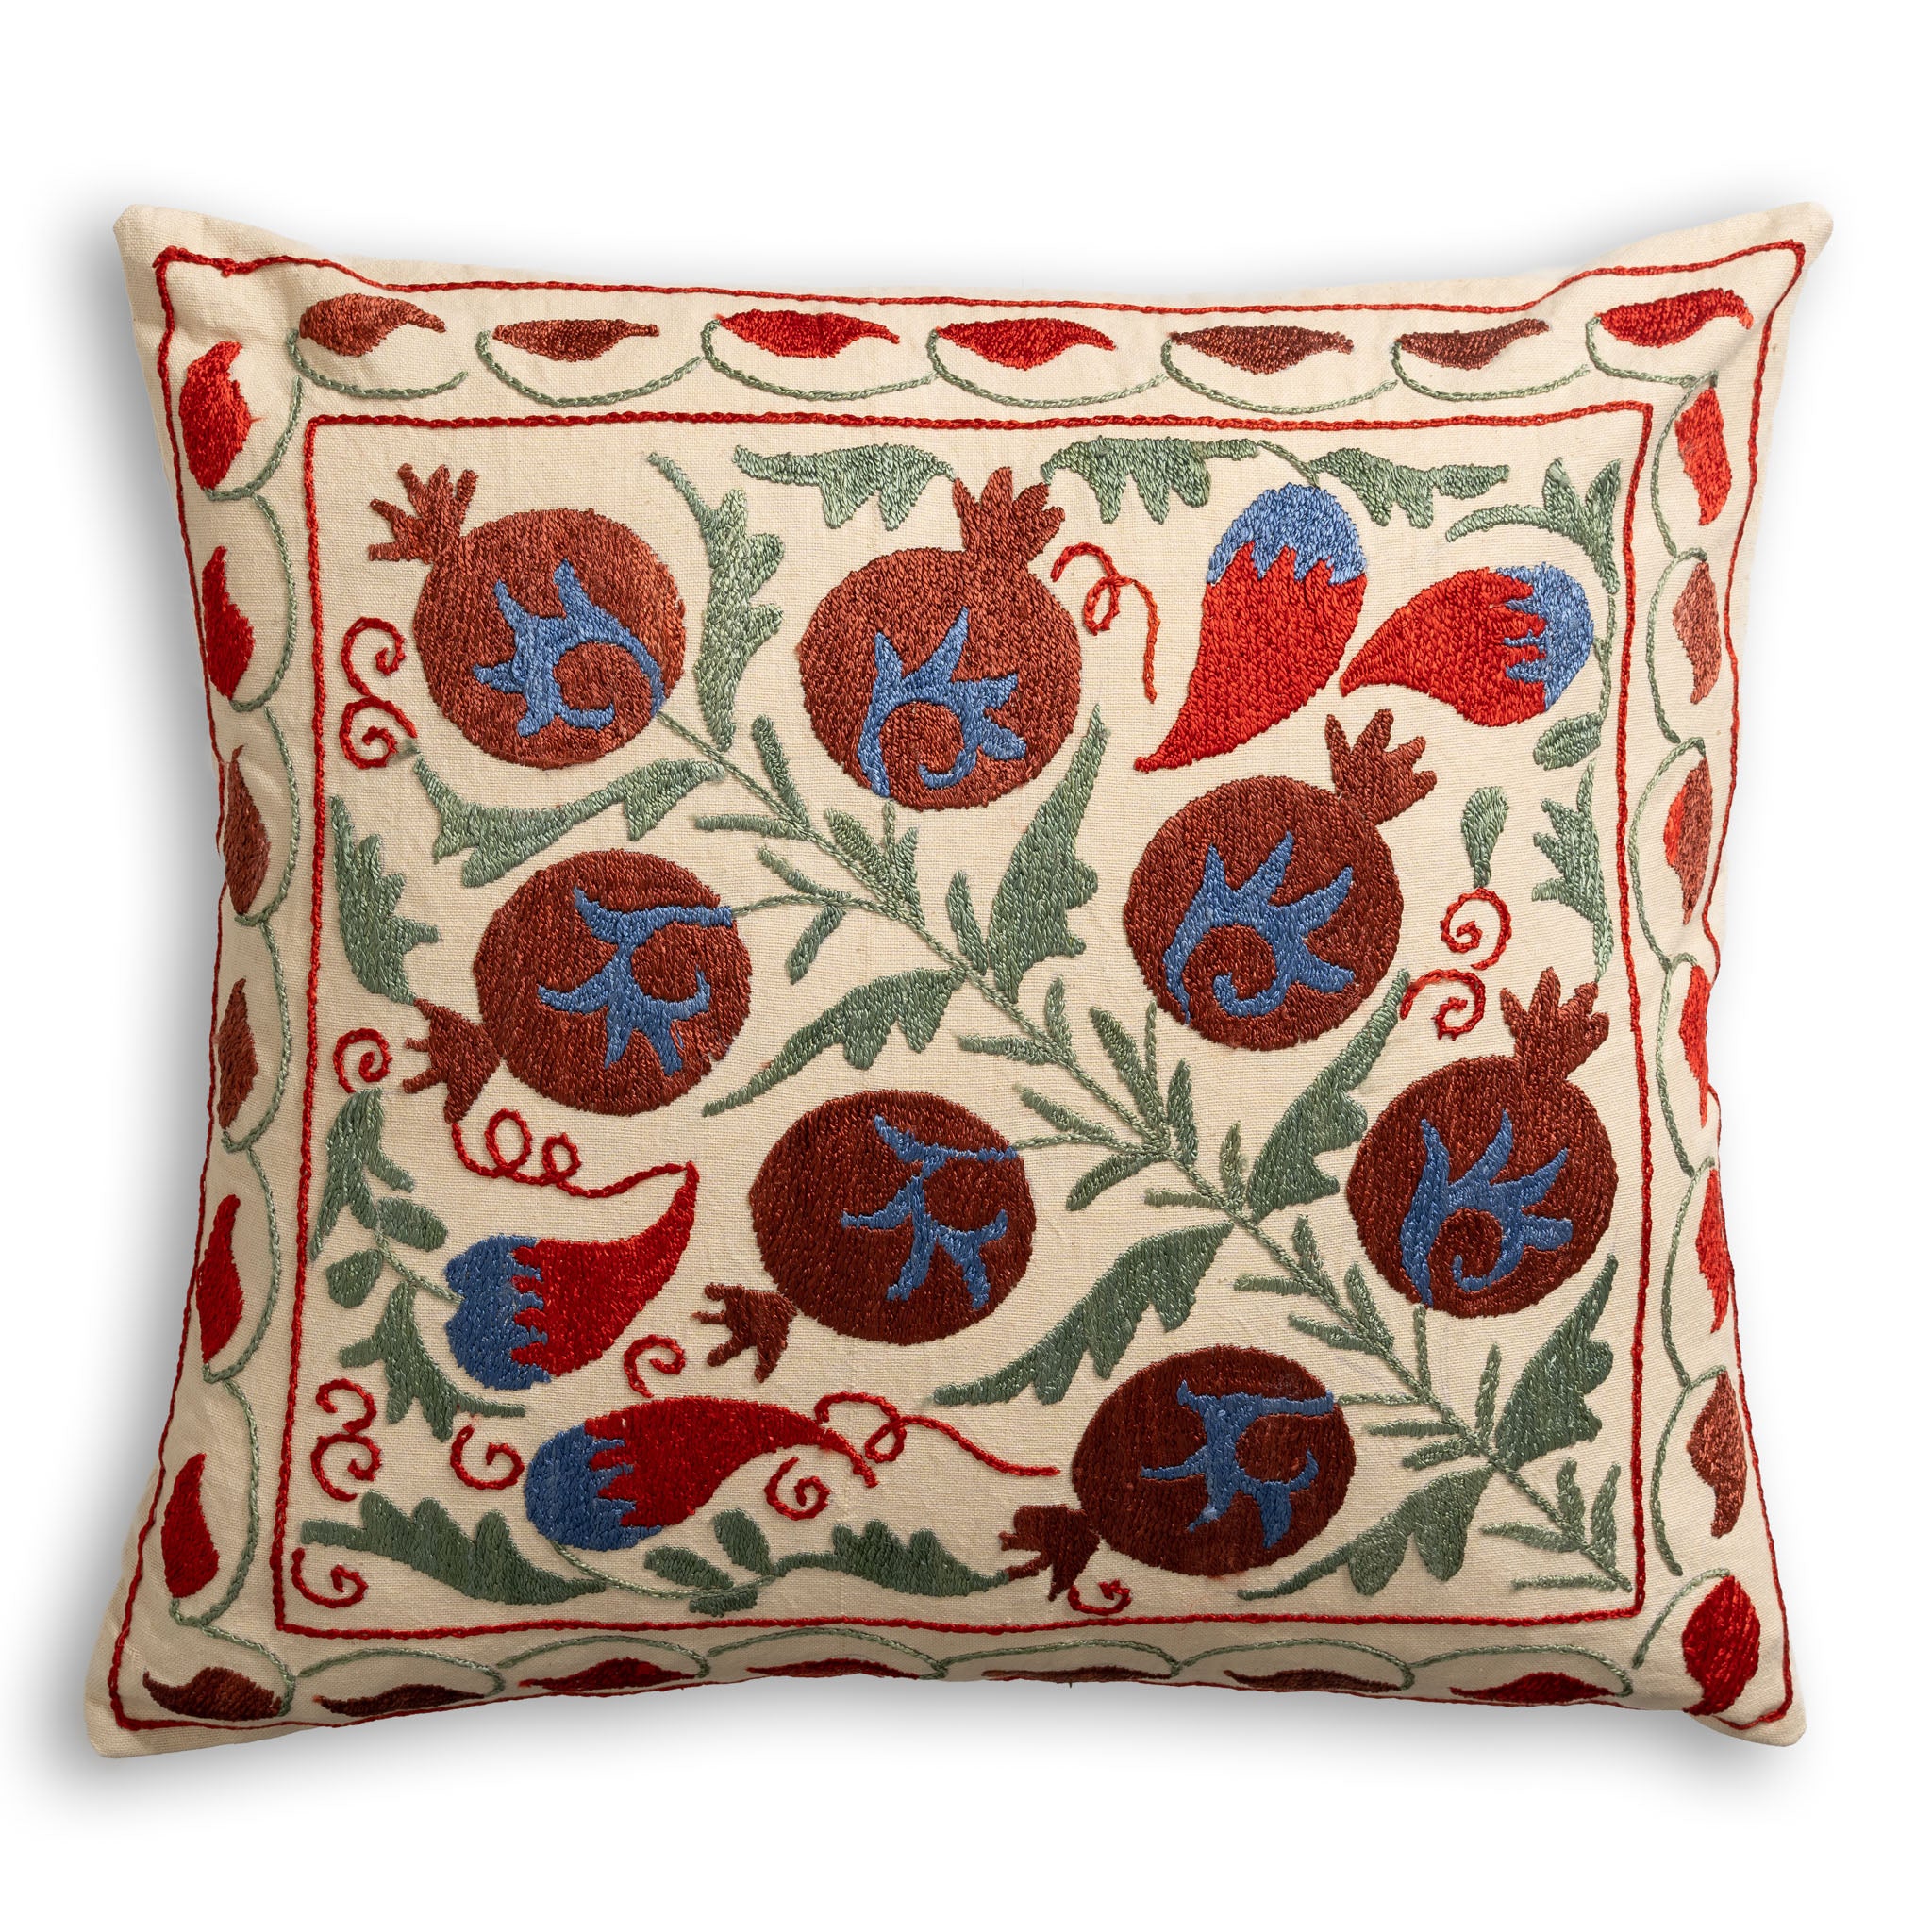 Suzani Silk Embroidered Stylised Floral Patterned Scatter Cushion on cream background with red, green and blue floral motifs